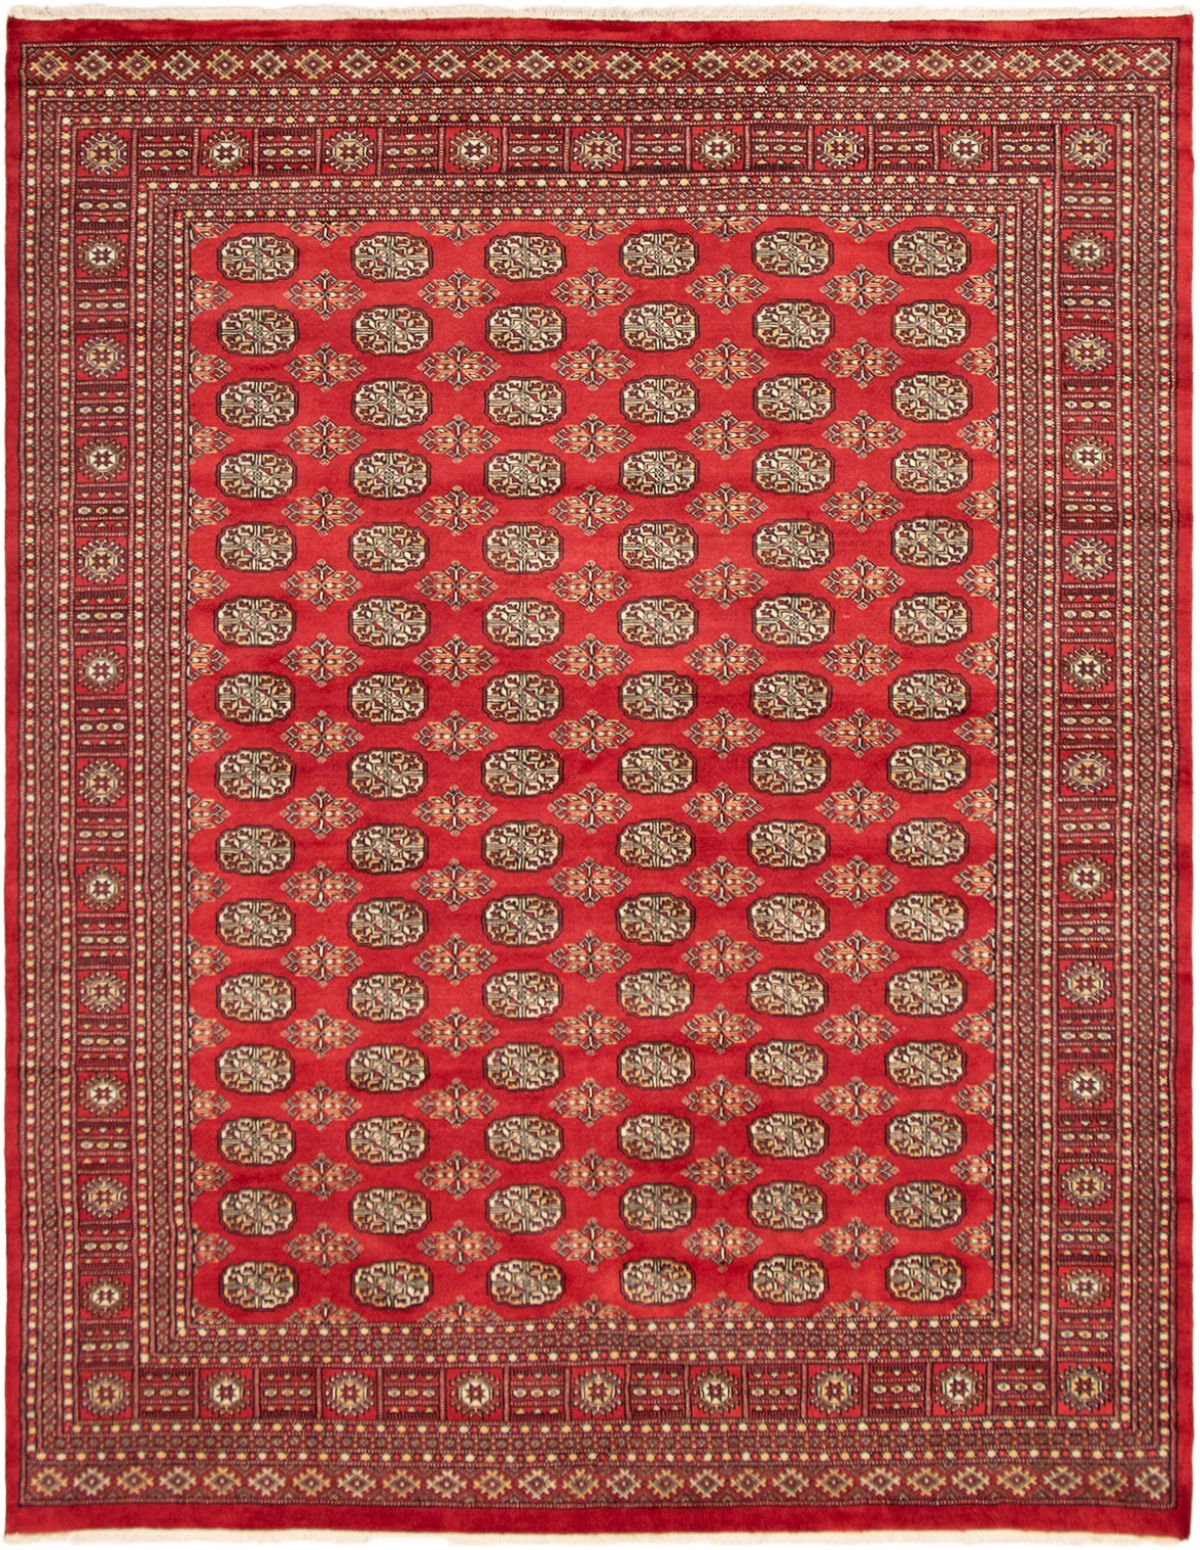 Hand-knotted Finest Peshawar Bokhara Red Wool Rug 8'0" x 9'9"  Size: 8'0" x 9'9"  